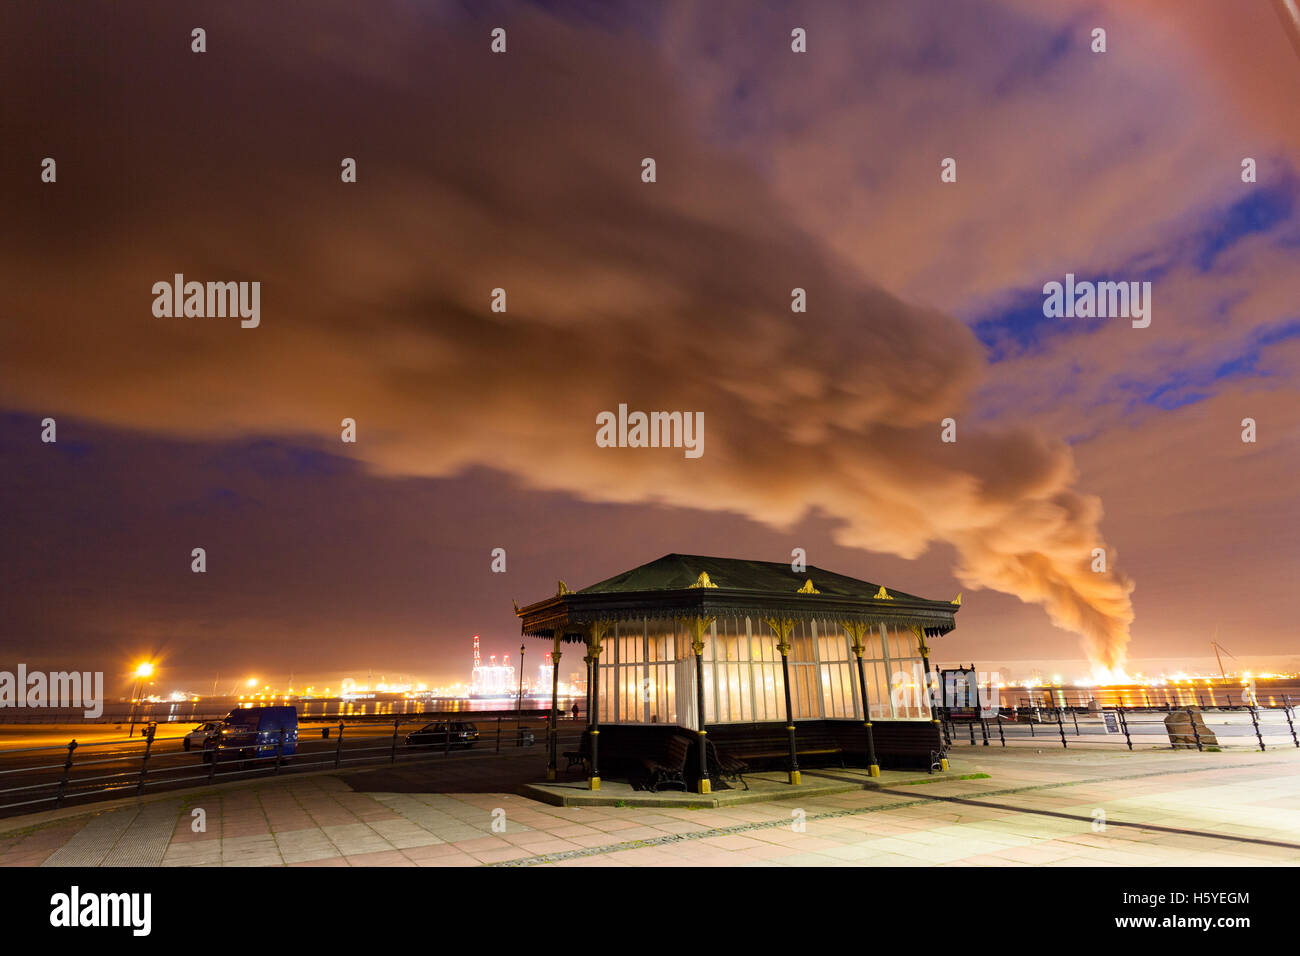 Large fire at Liverpool Docks in the early hours viewed from across the Mersey River at New Brighton Stock Photo